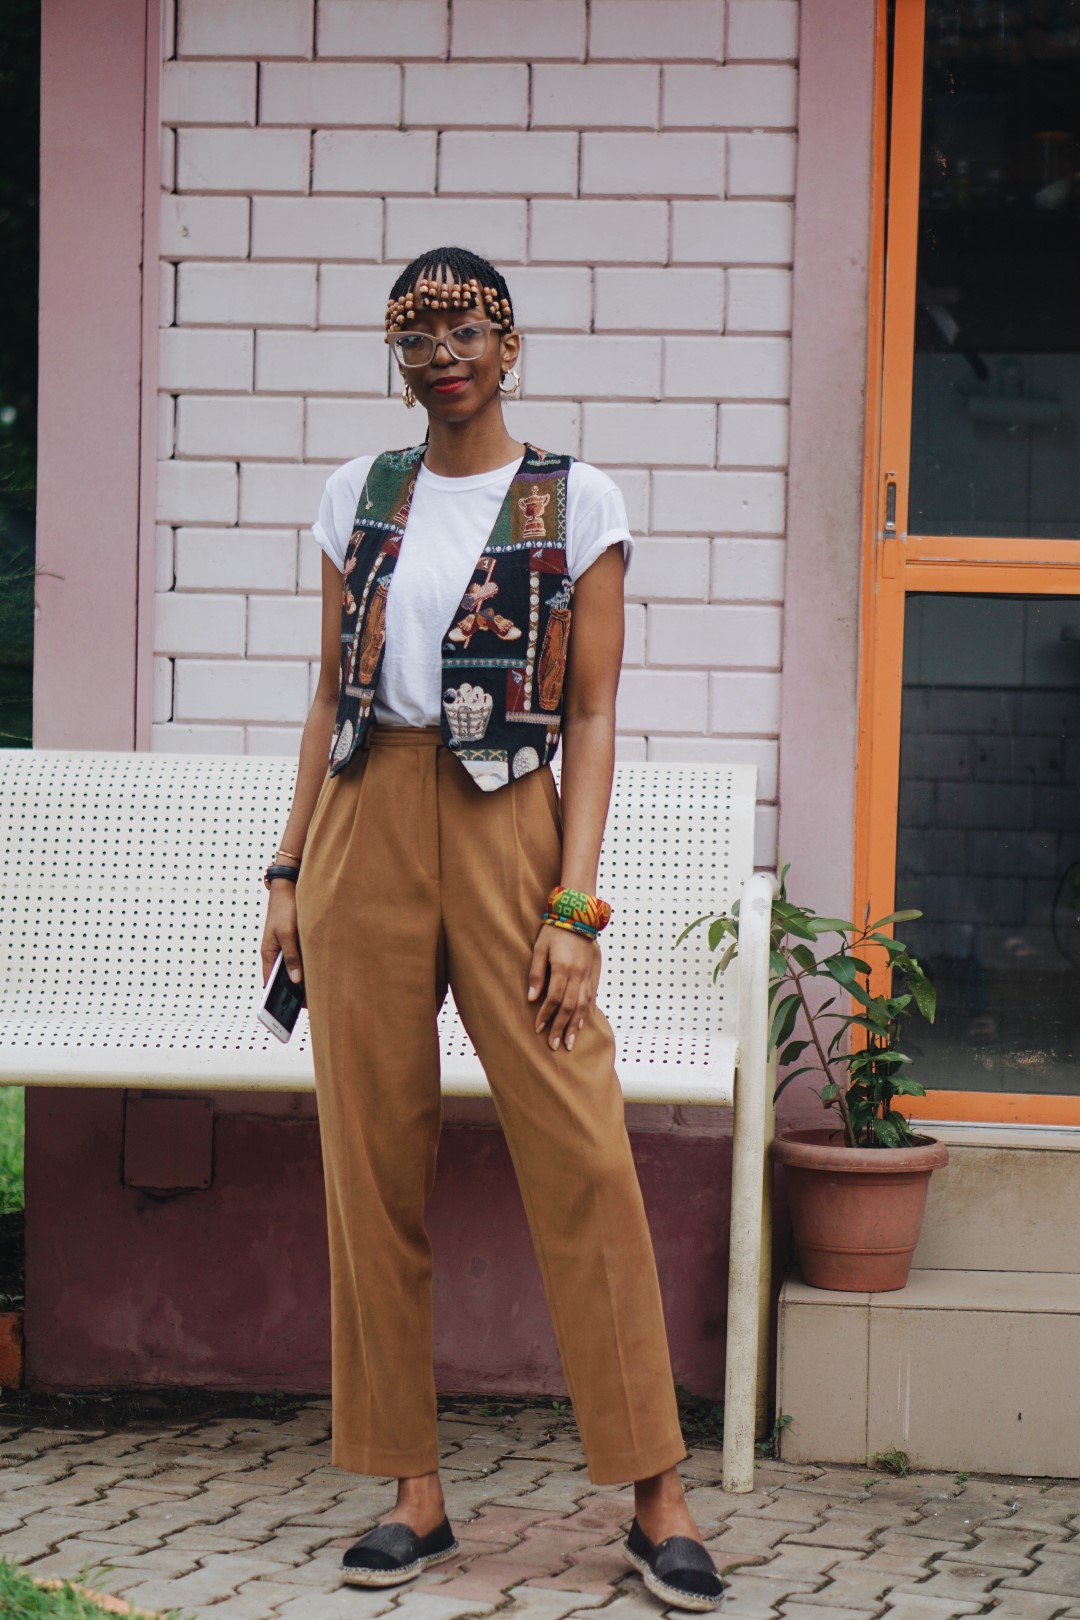 Cassie Daves wearing a high waist vintage pants and retro waist coat